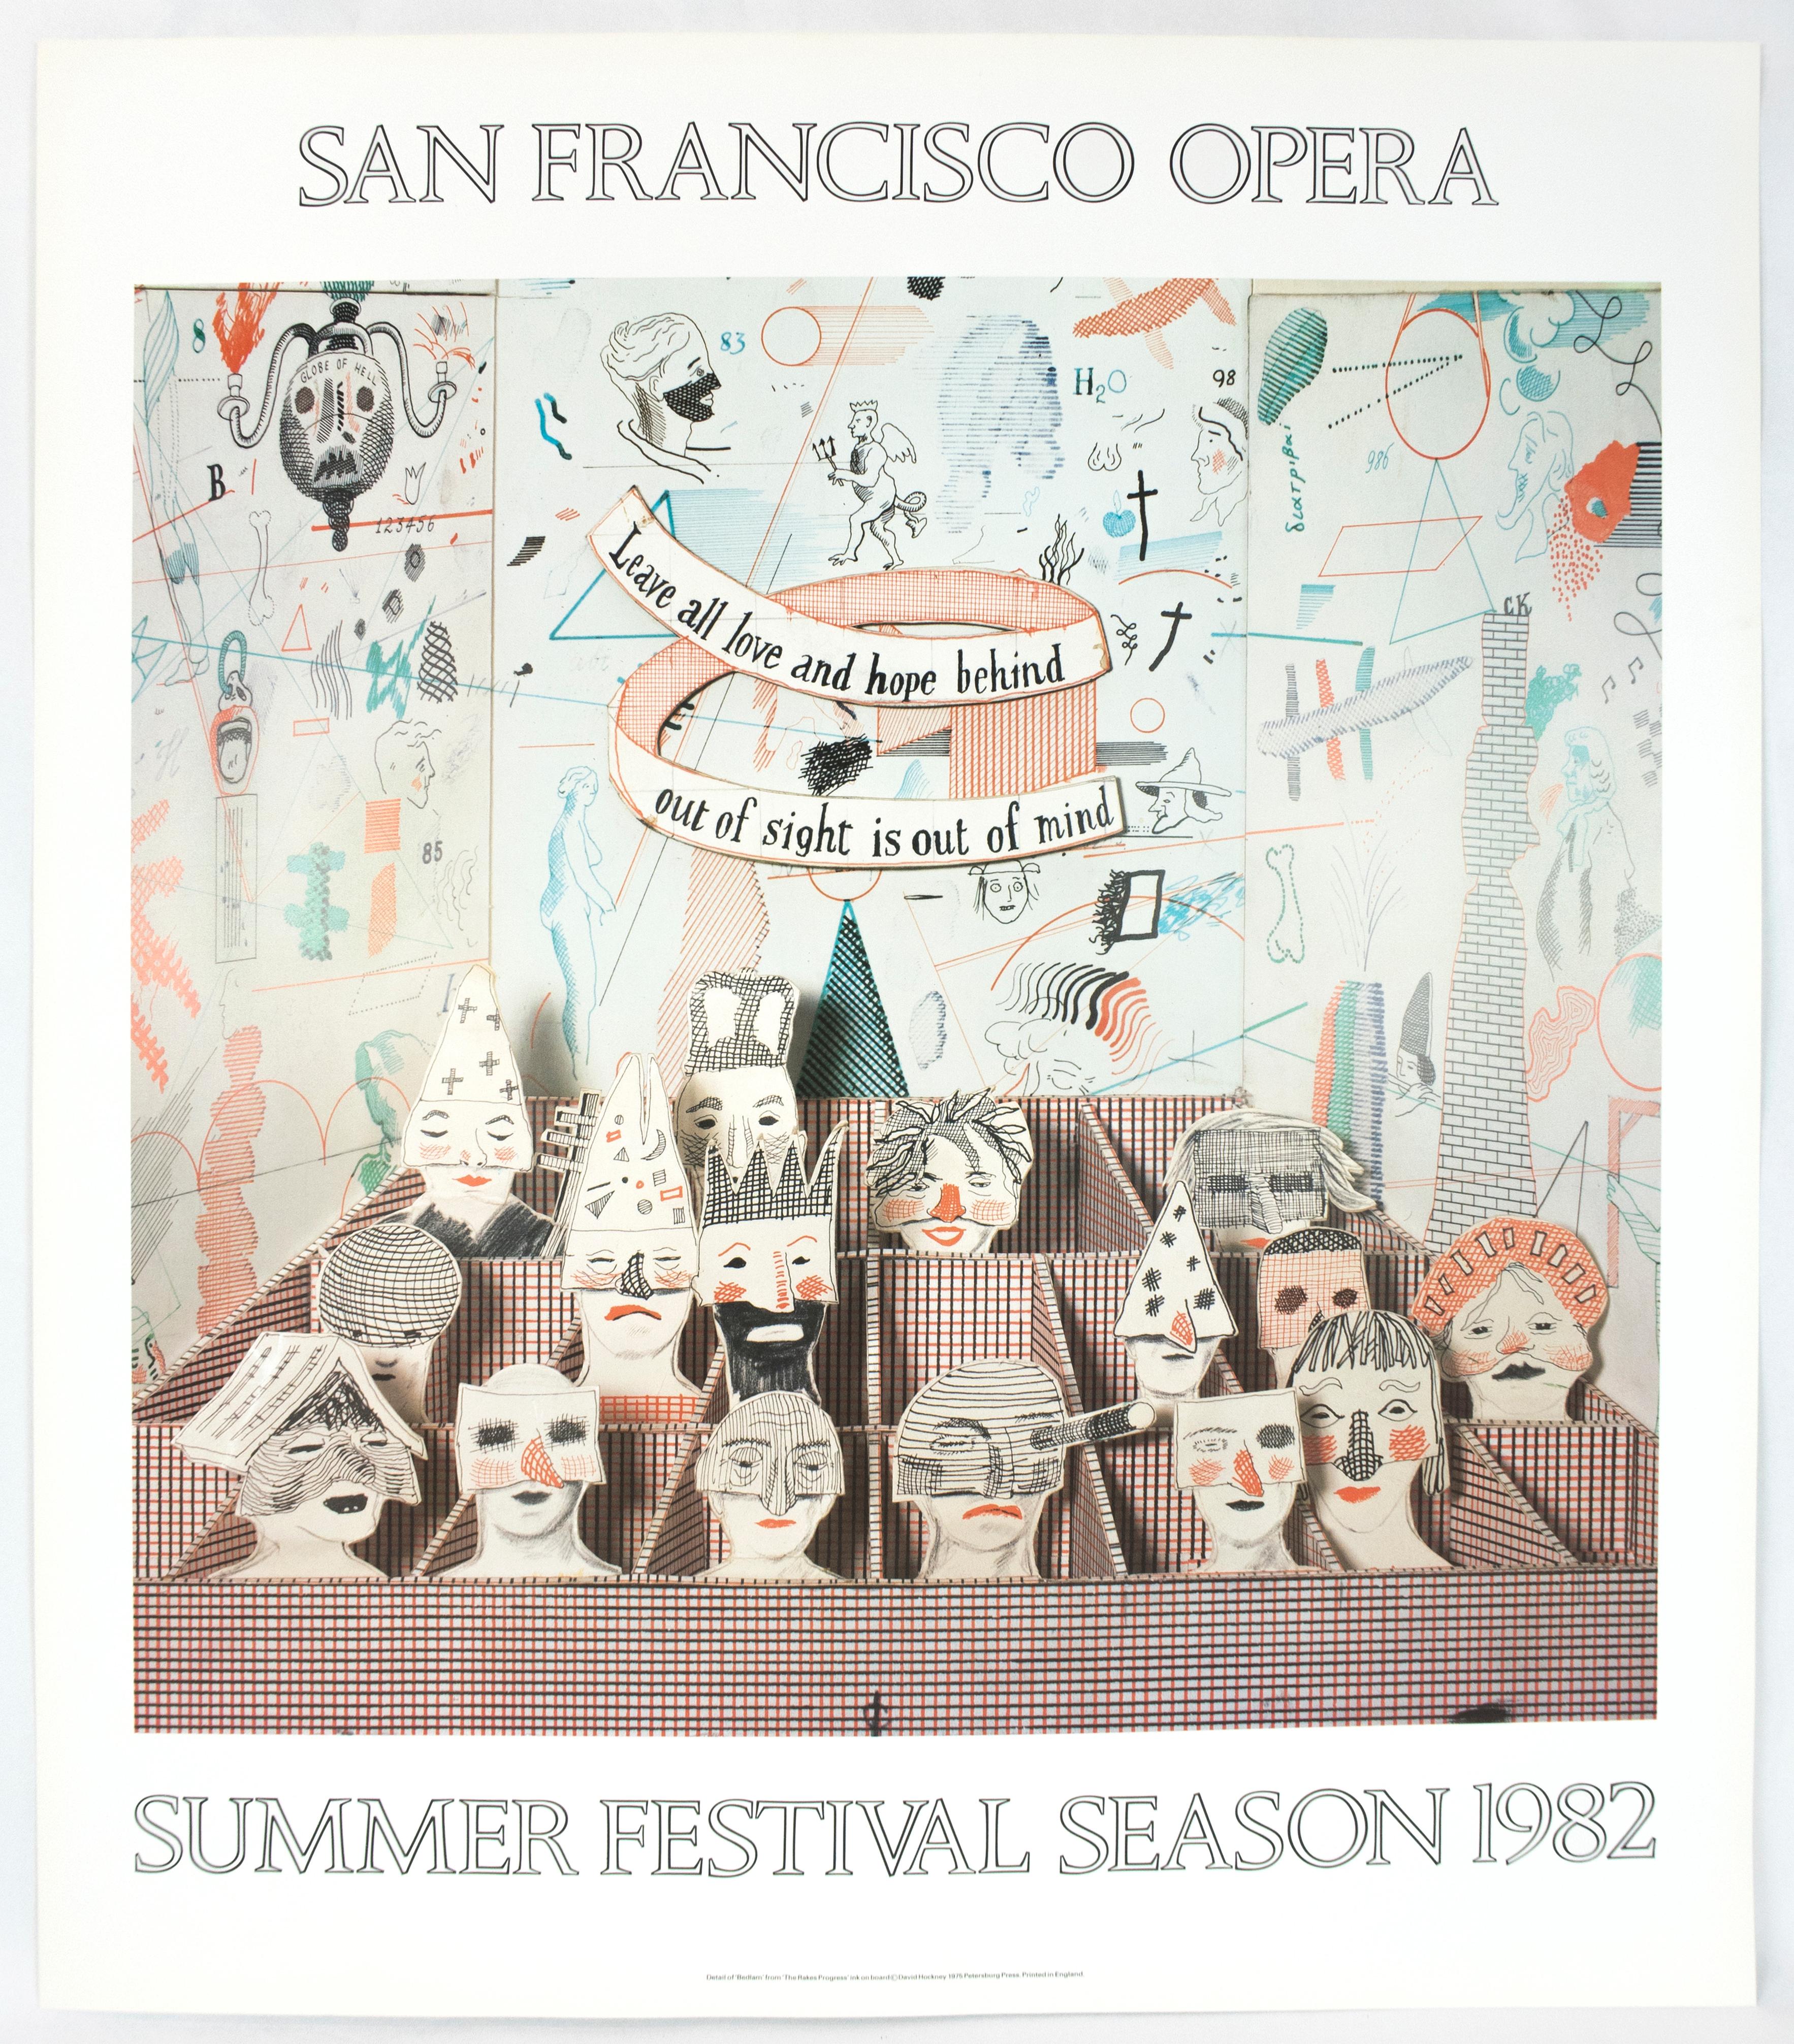 Vintage poster for the 1982 Summer Festival season of the San Francisco Opera. David Hockney designed the whimsical sets and costumes for the San Francisco Opera's production of Igor Stravinsky's "The Rakes Progress". Here the Bedlam scene is